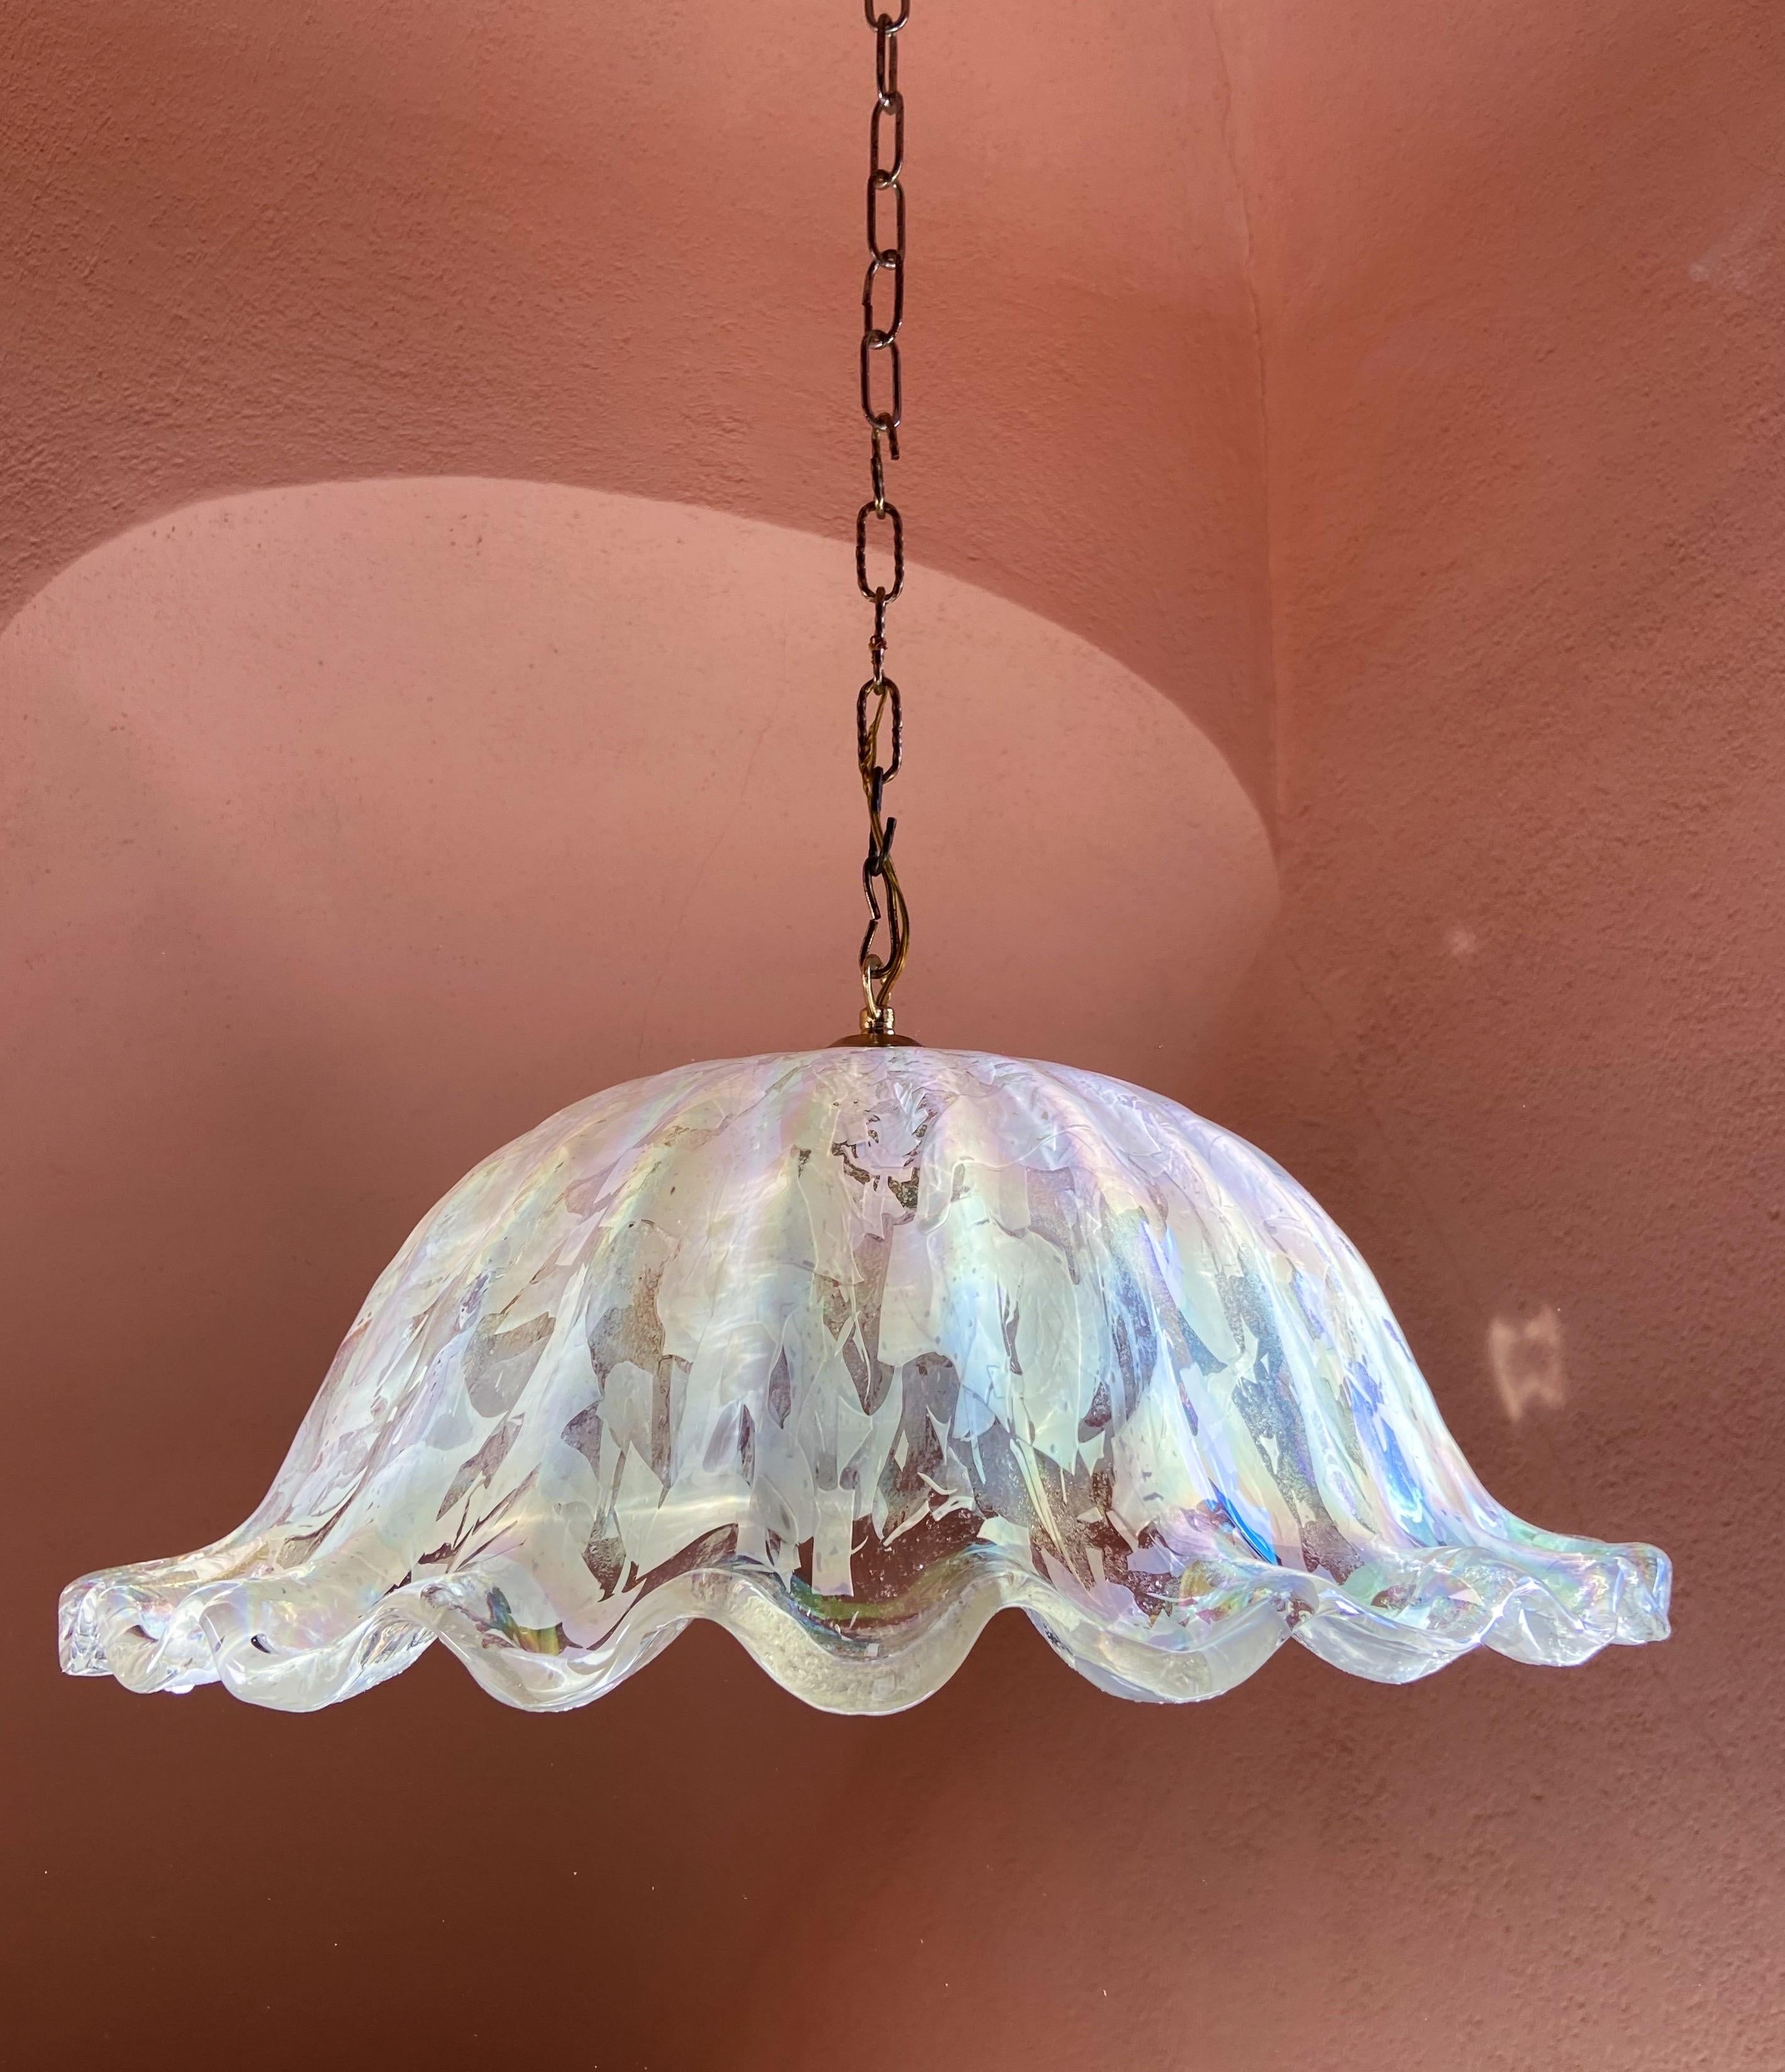 20th Century Mid-Century Modern Murano Glass Ceiling Light in 'Psychedelic' Rainbow Colour For Sale